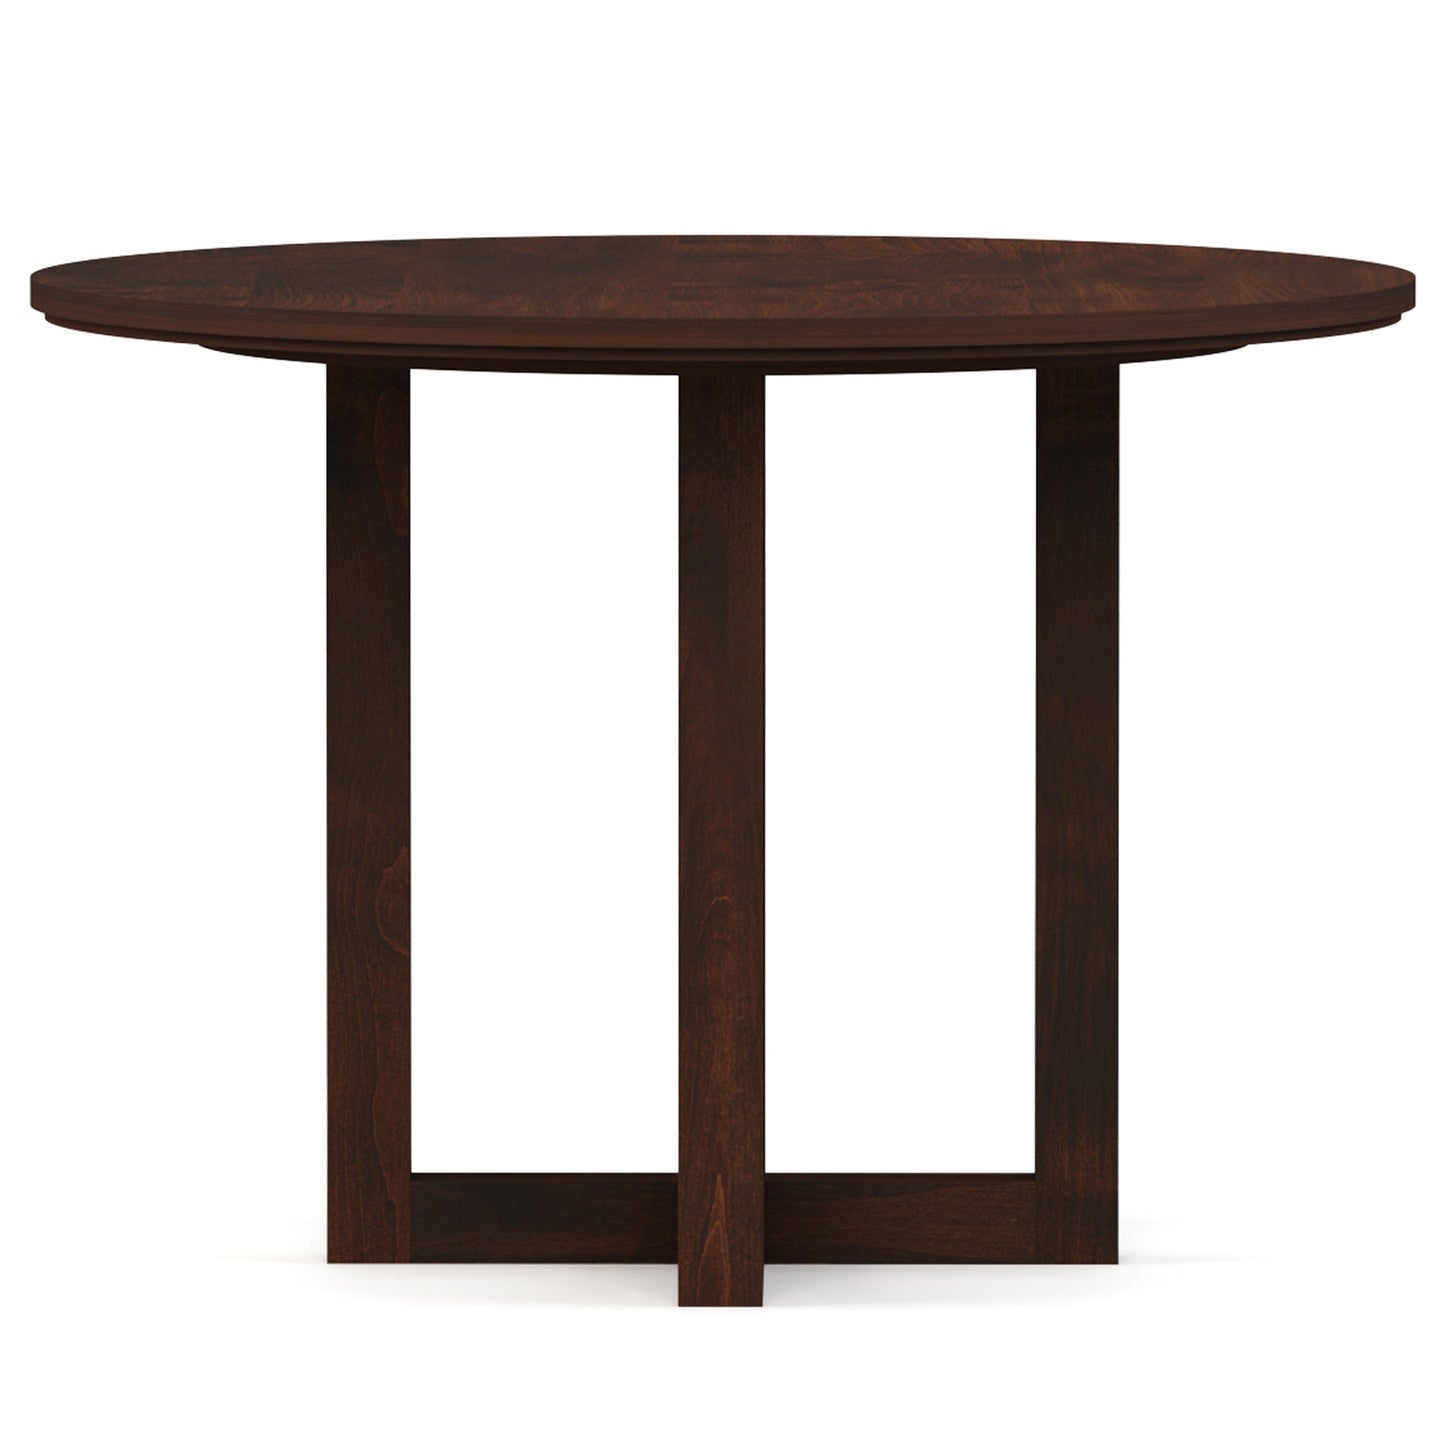 Dwyer 42-inch Round Dining Table